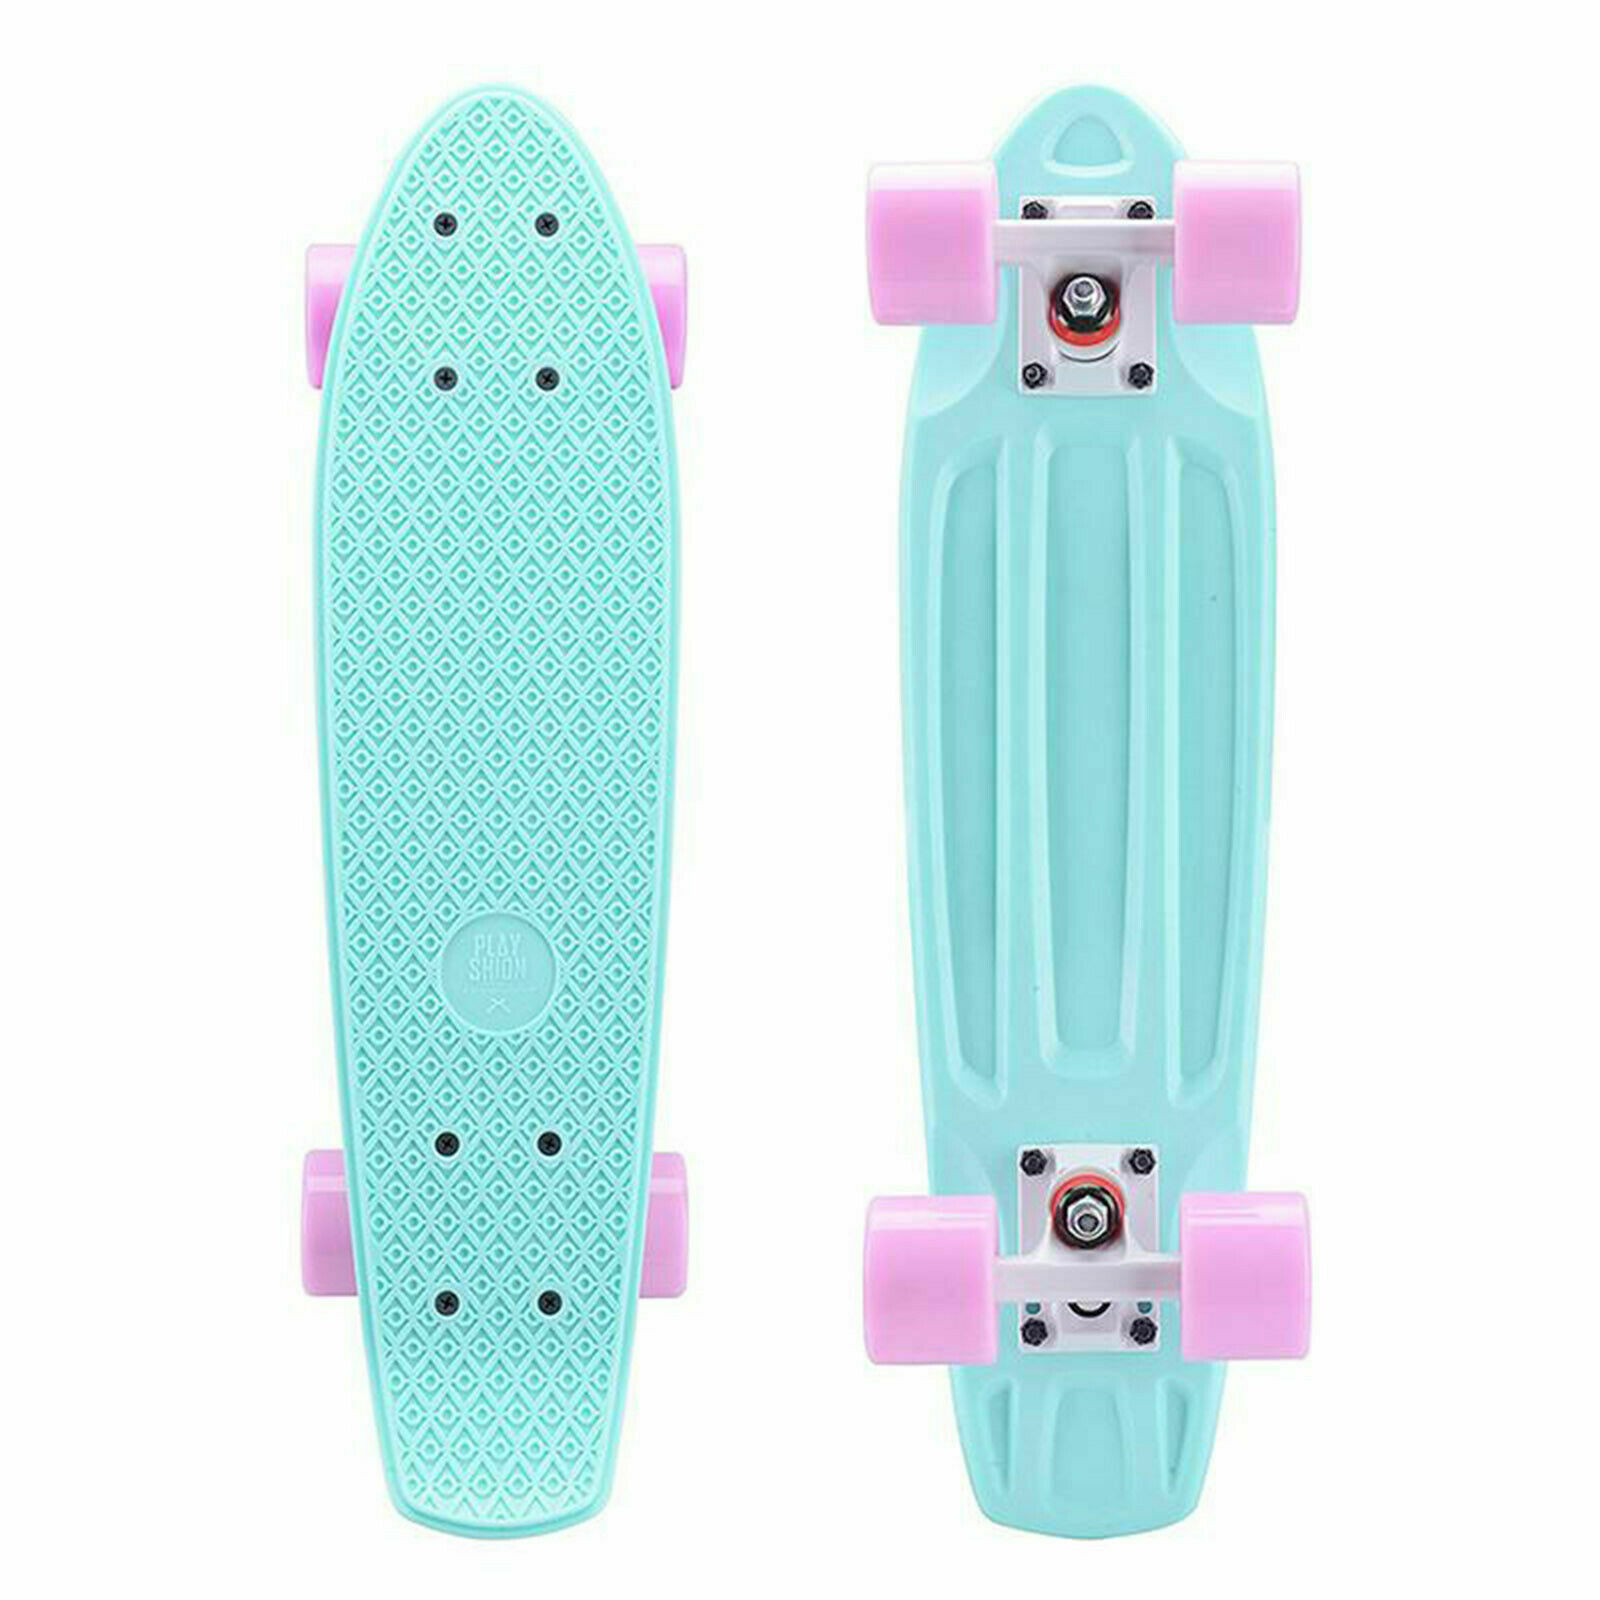 Skateboards 22" X 6" Complete Skateboards For Kids/ Youths/ Teens/ Beginners